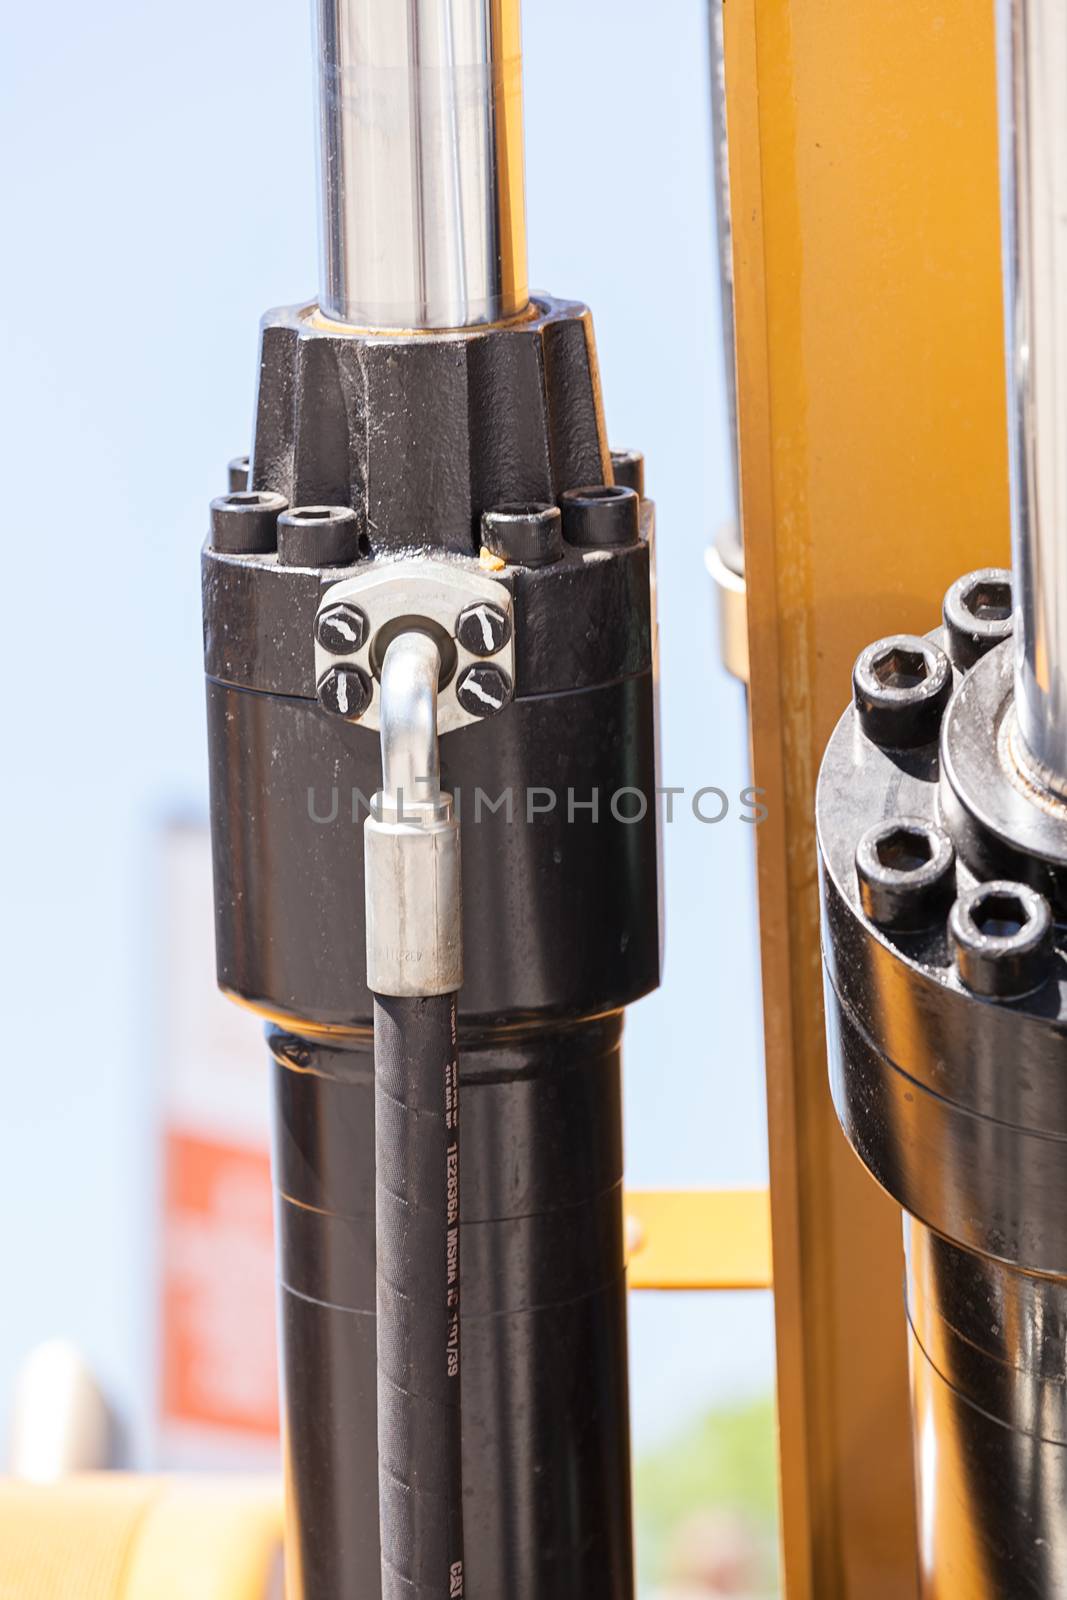 parts of machinery for the construction industry, note shallow depth of field